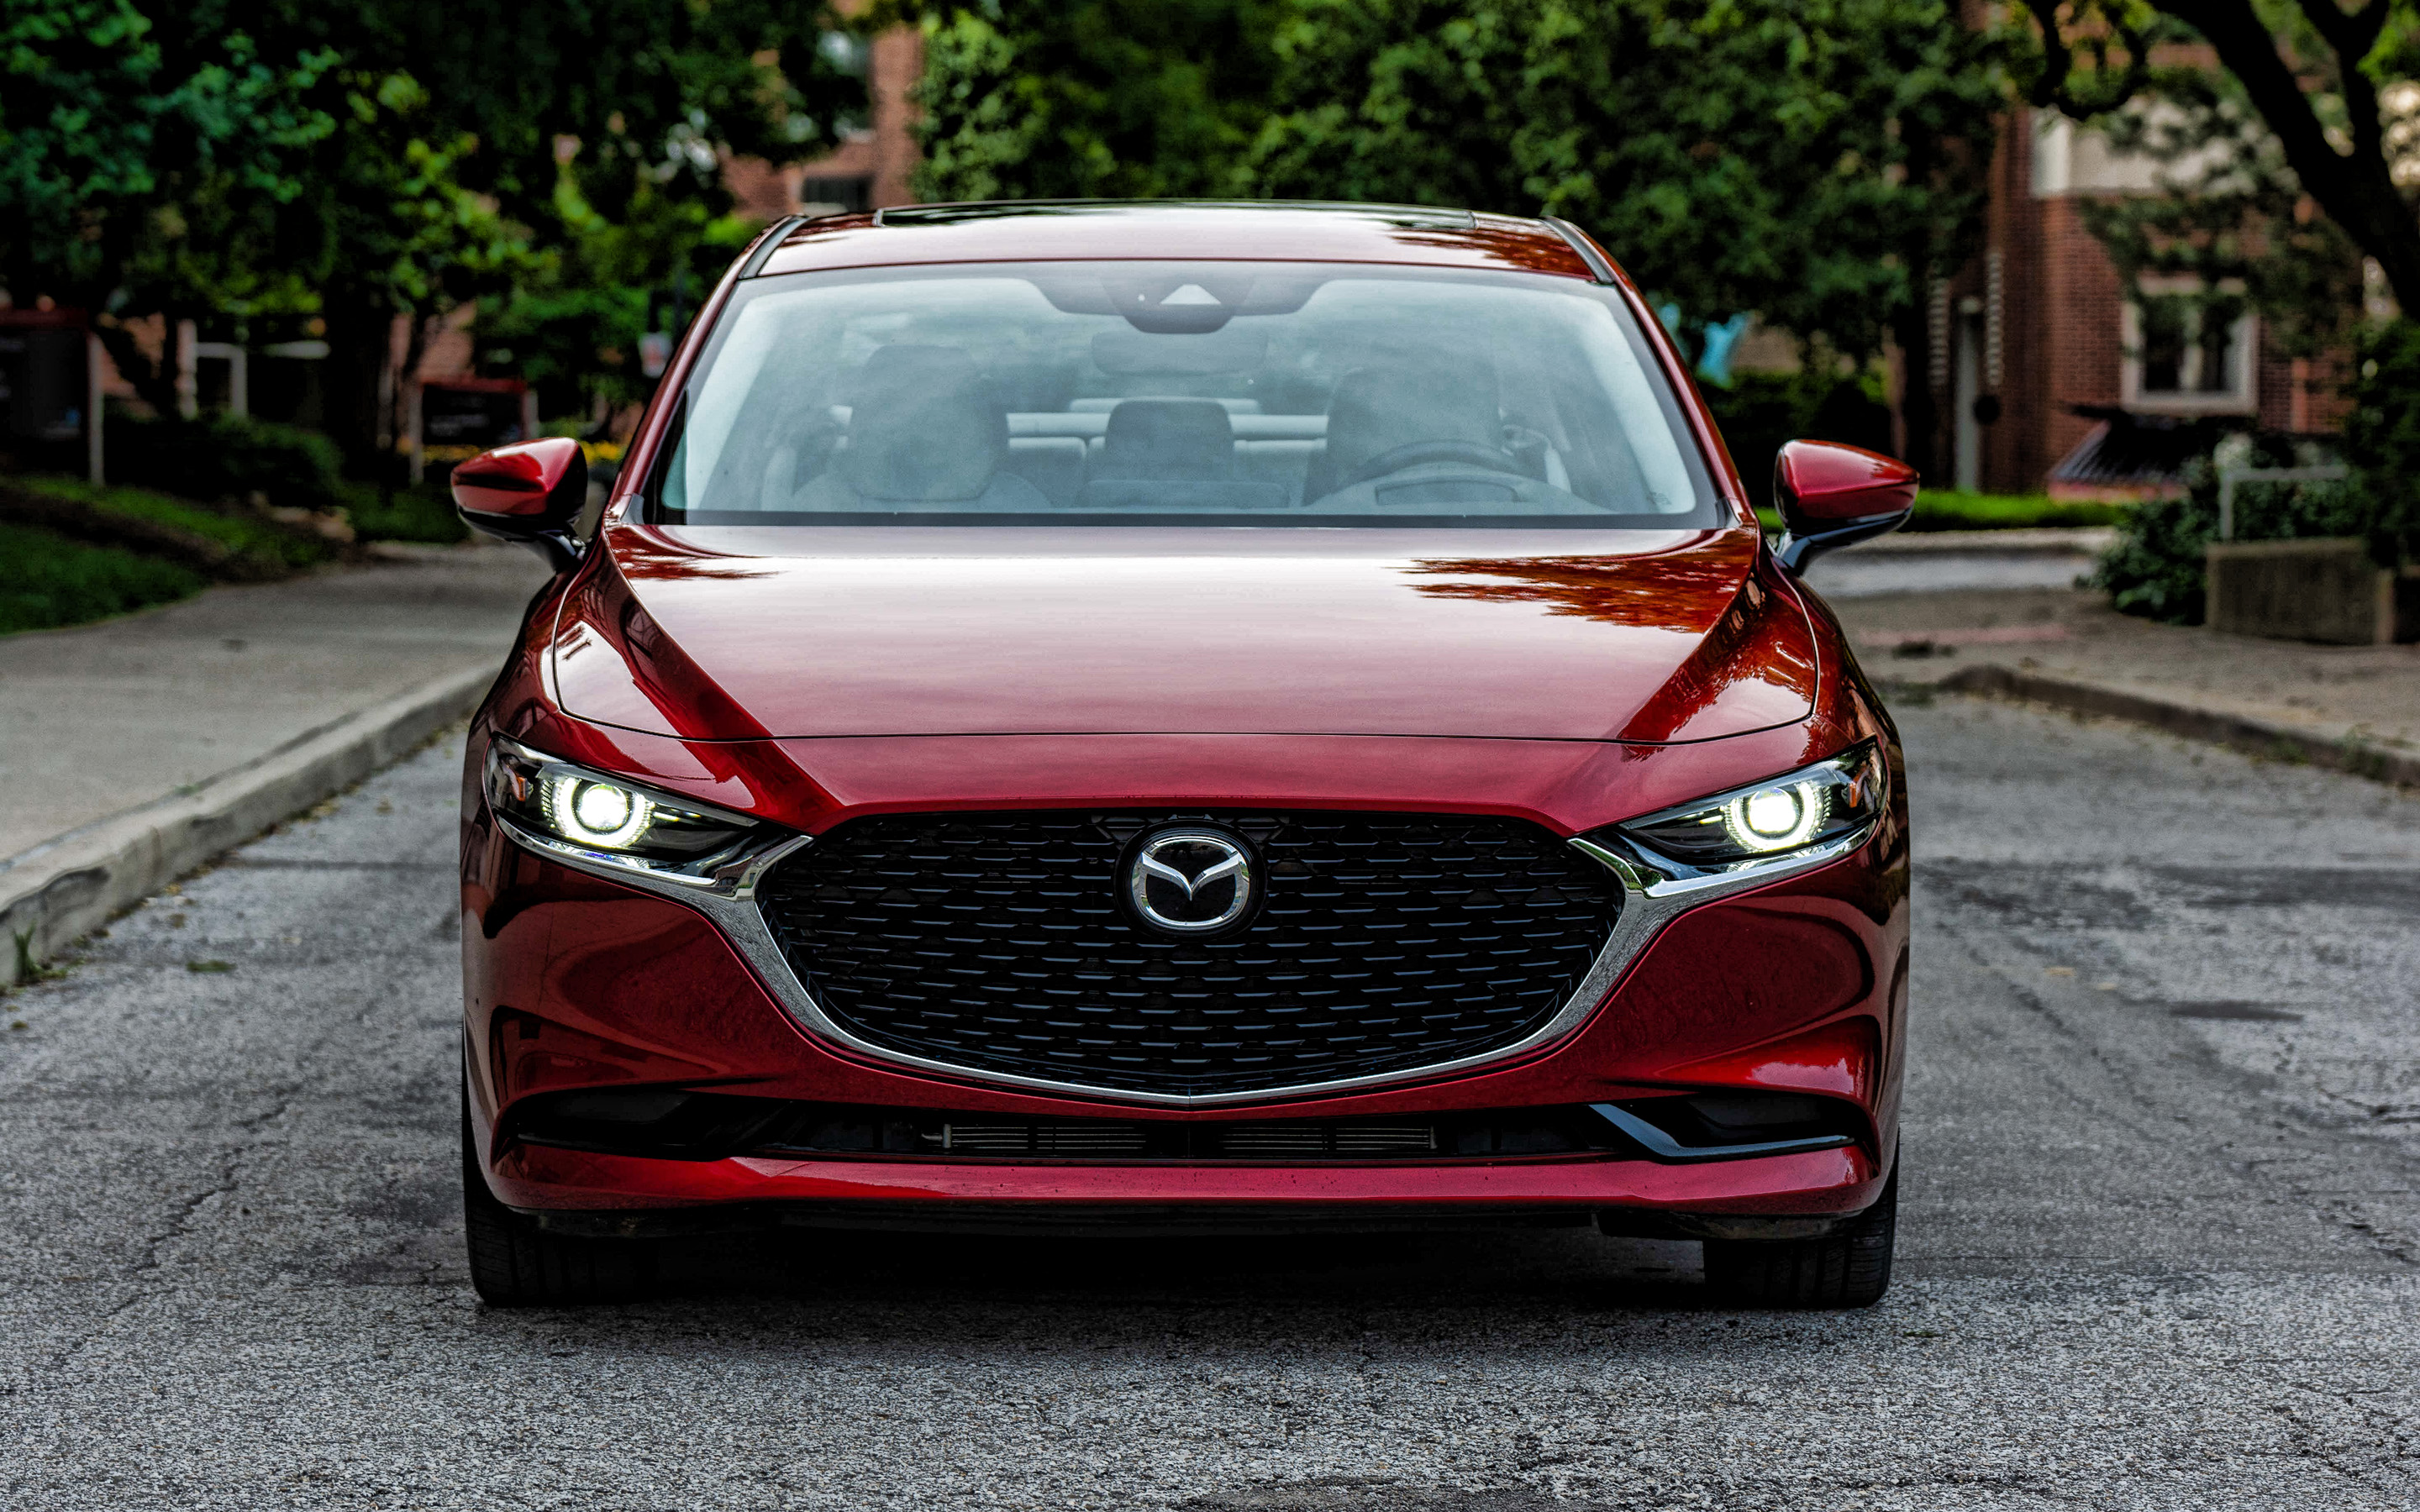 Download wallpapers Mazda 3, 2020, front view, red hatchback, exterior